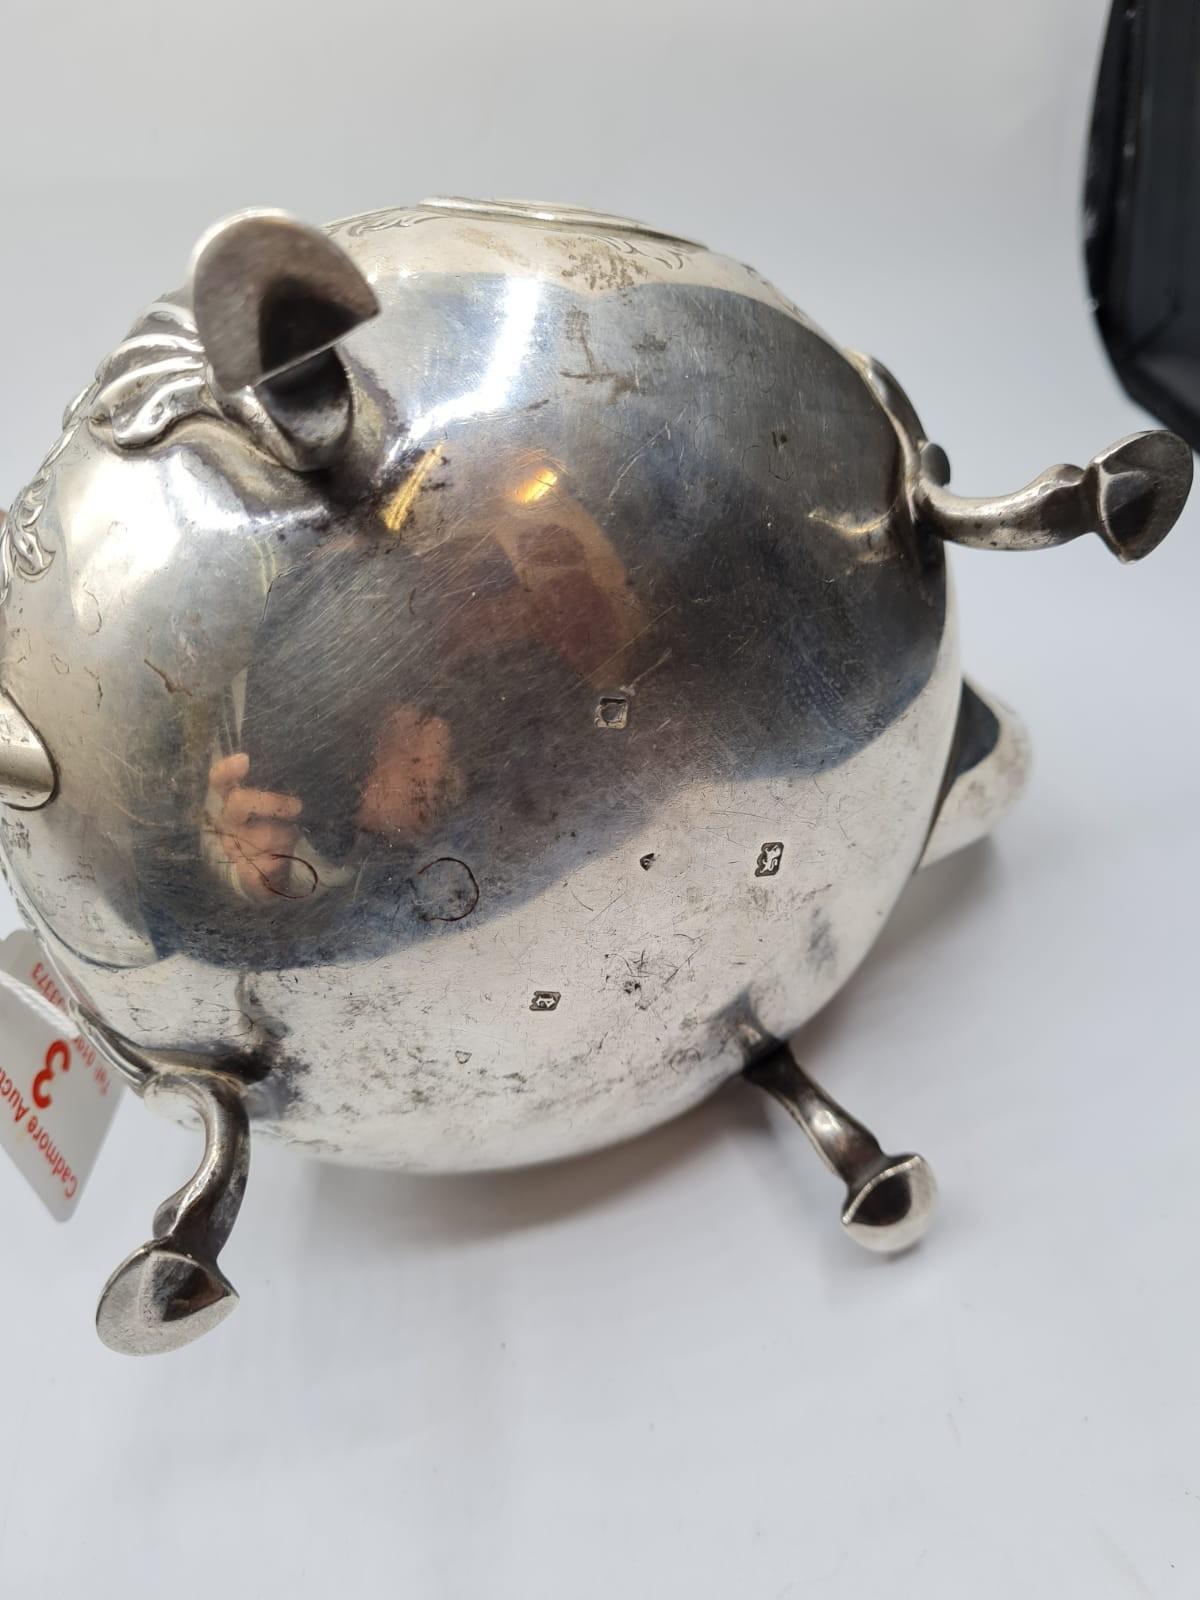 1920 Ornate Silver Teapot 766g - Image 7 of 8